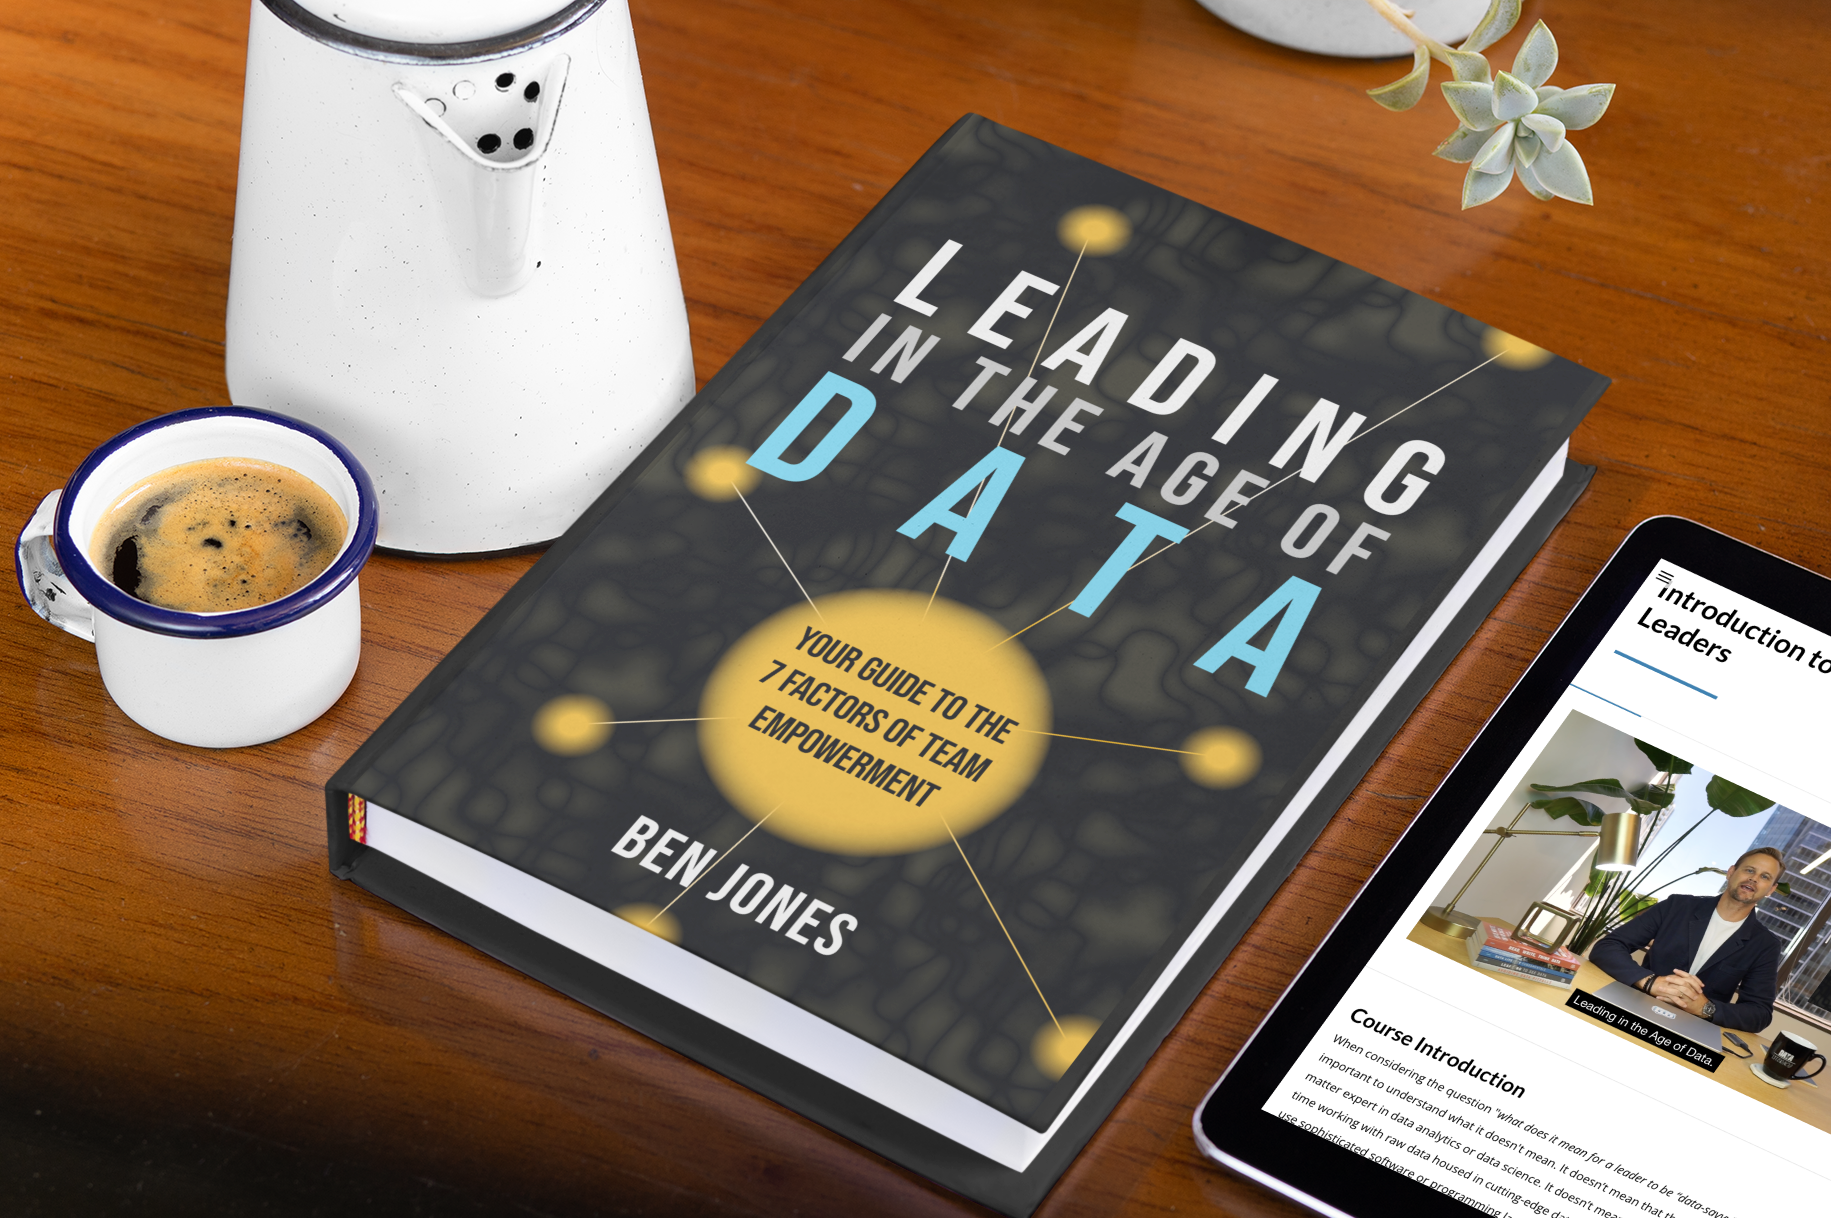 New Release: “Leading in the Age of Data” by Ben Jones | Data Literacy | Data Literacy  